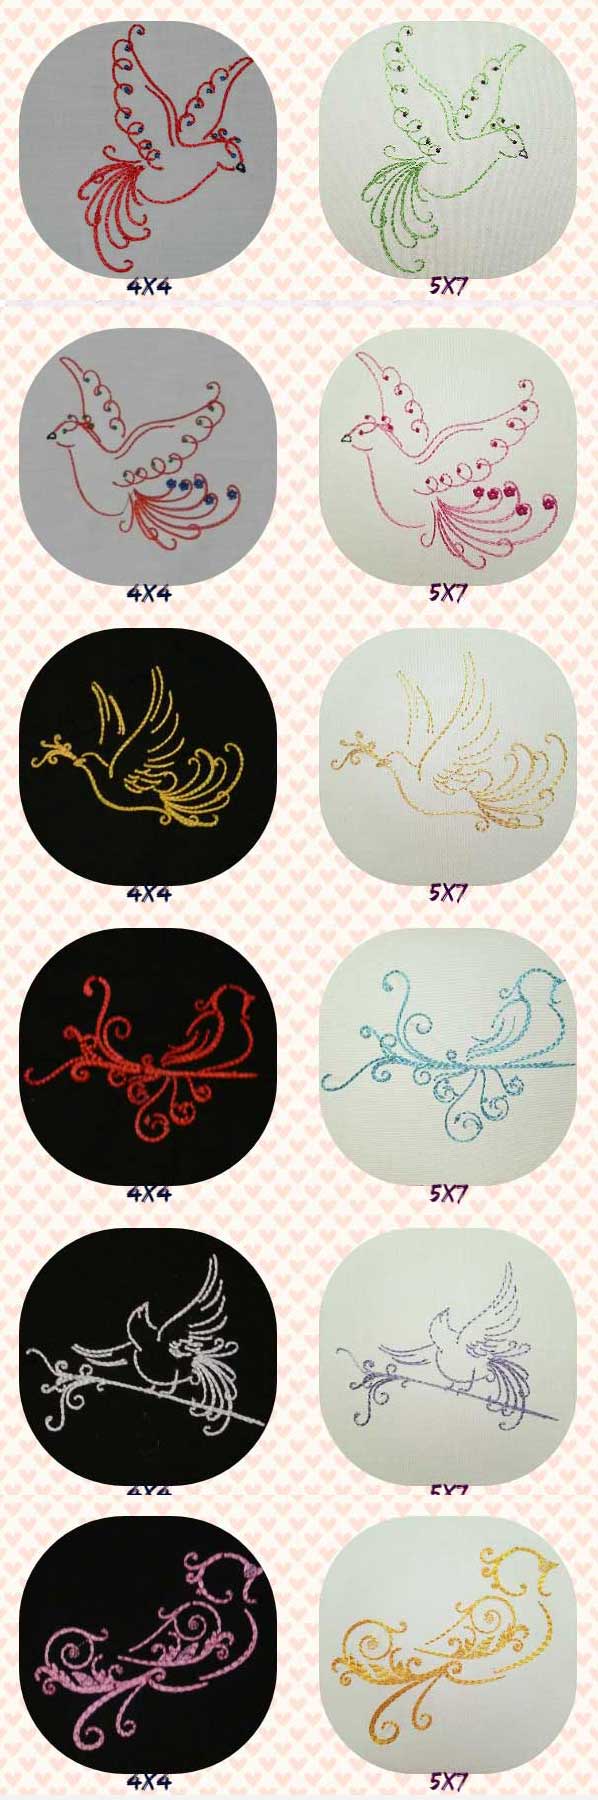 Swirly Doves Embroidery Machine Design Details